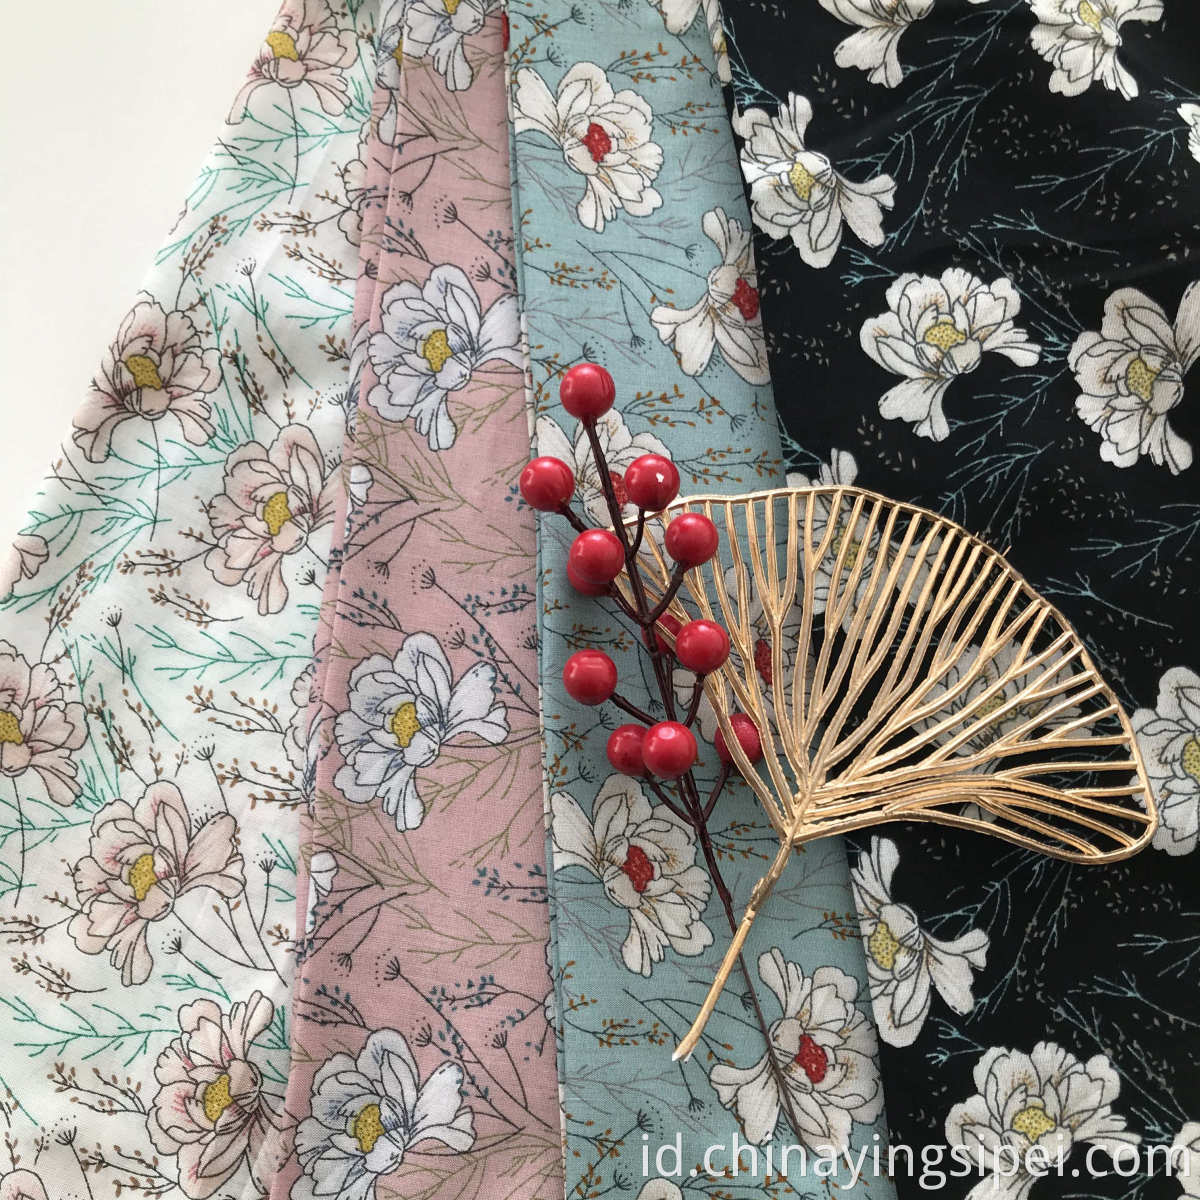 Desain Baru Floral Print Fabric Rayon Fabric Stock Lot in Shaoxing for Dress